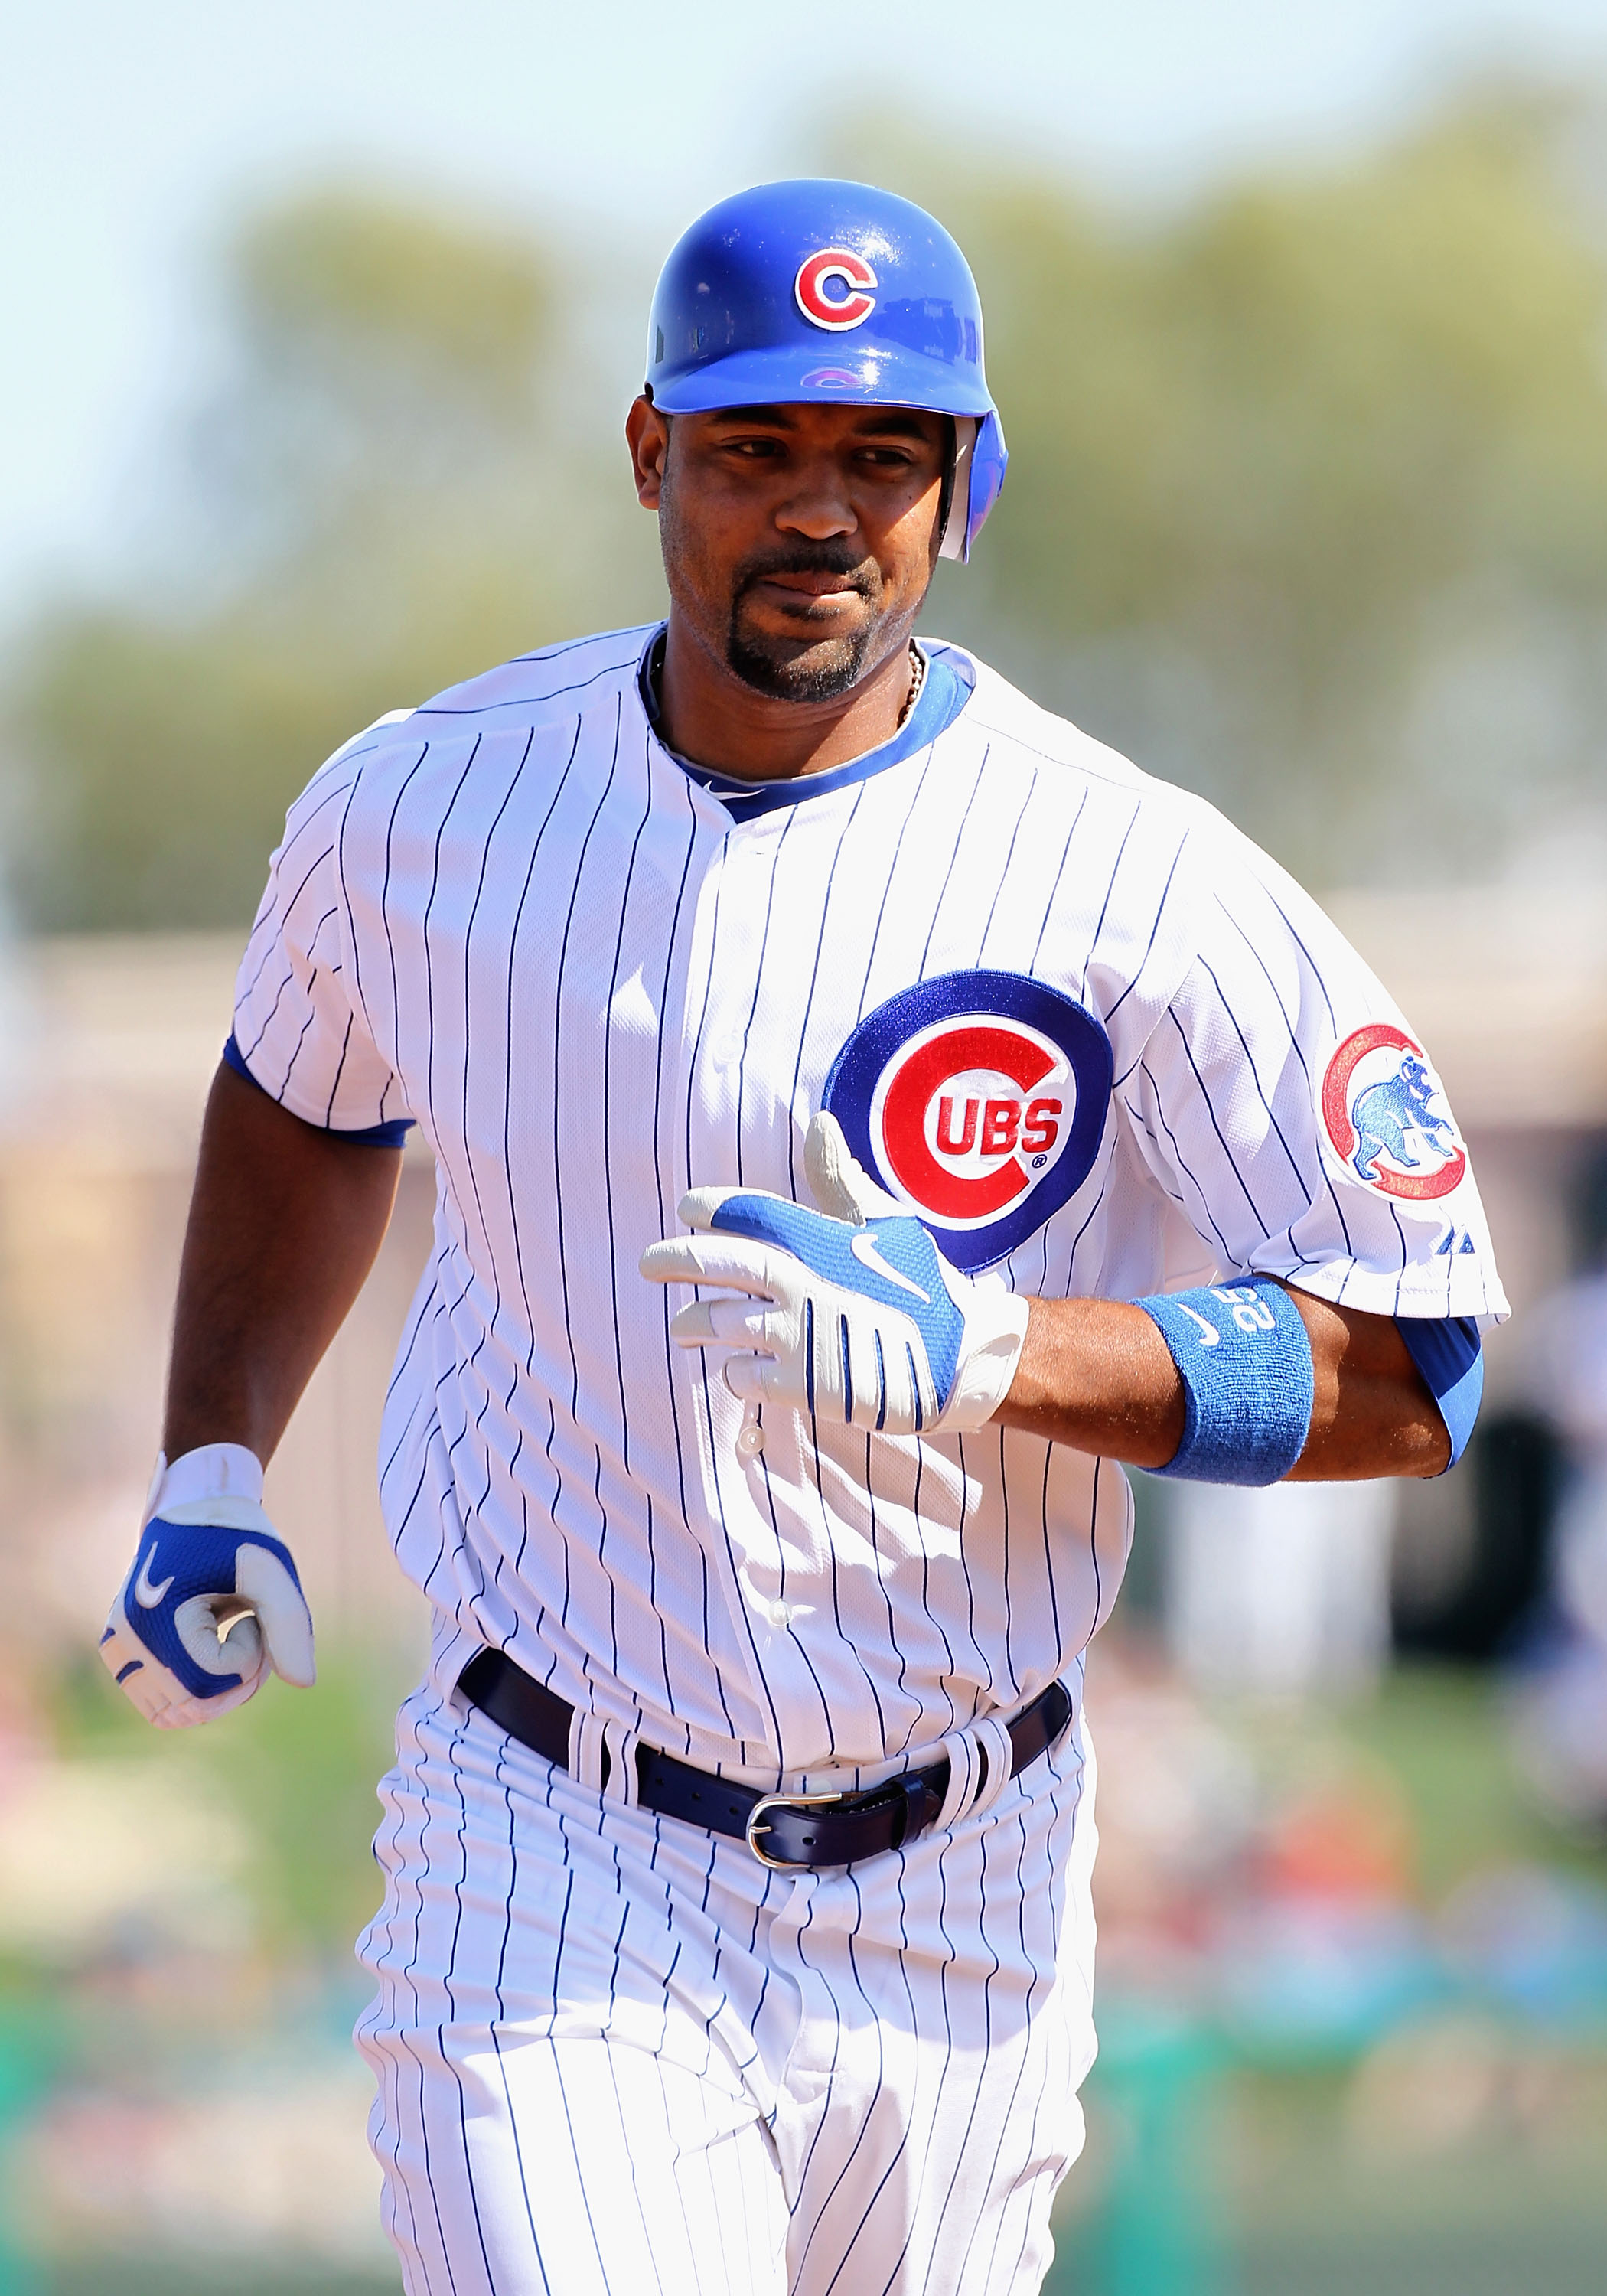 MESA, AZ - MARCH 04:  Derrek Lee #25 of the Chicago Cubs rounds the bases after hitting a solo home run against the Oakland Athletics during the first inning of the MLB spring training game at HoHoKam Park on March 4, 2009 in Mesa, Arizona  (Photo by Chri